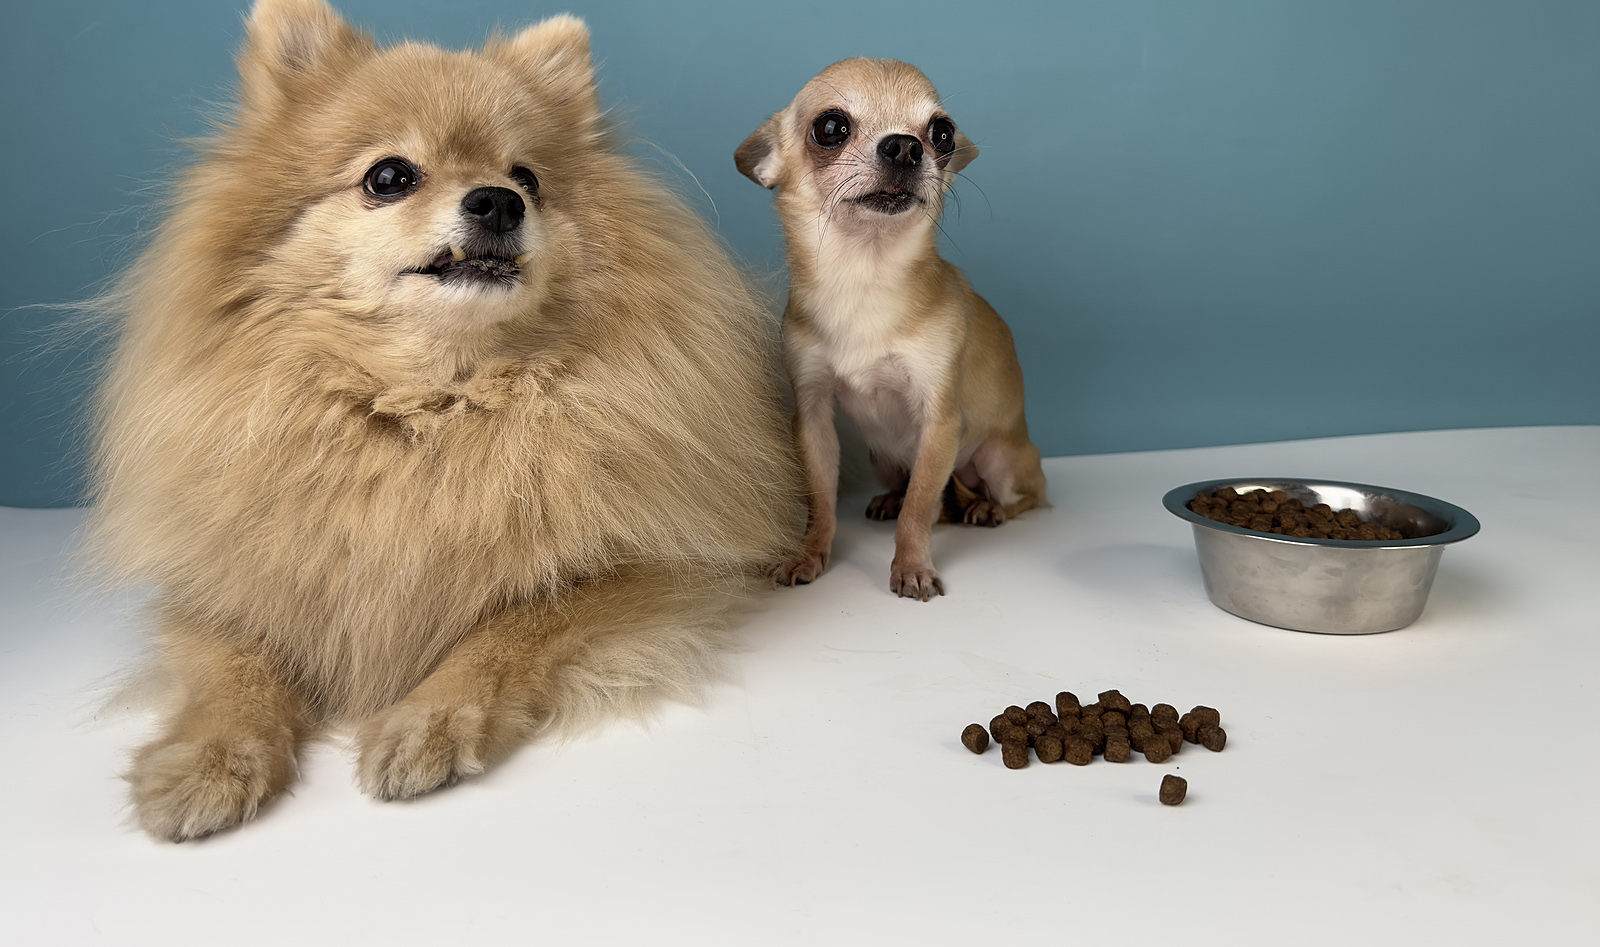 Two dogs sitting next to each other. A bowl of dog food sits off to the side, and some of the food is on the floor with the dogs.